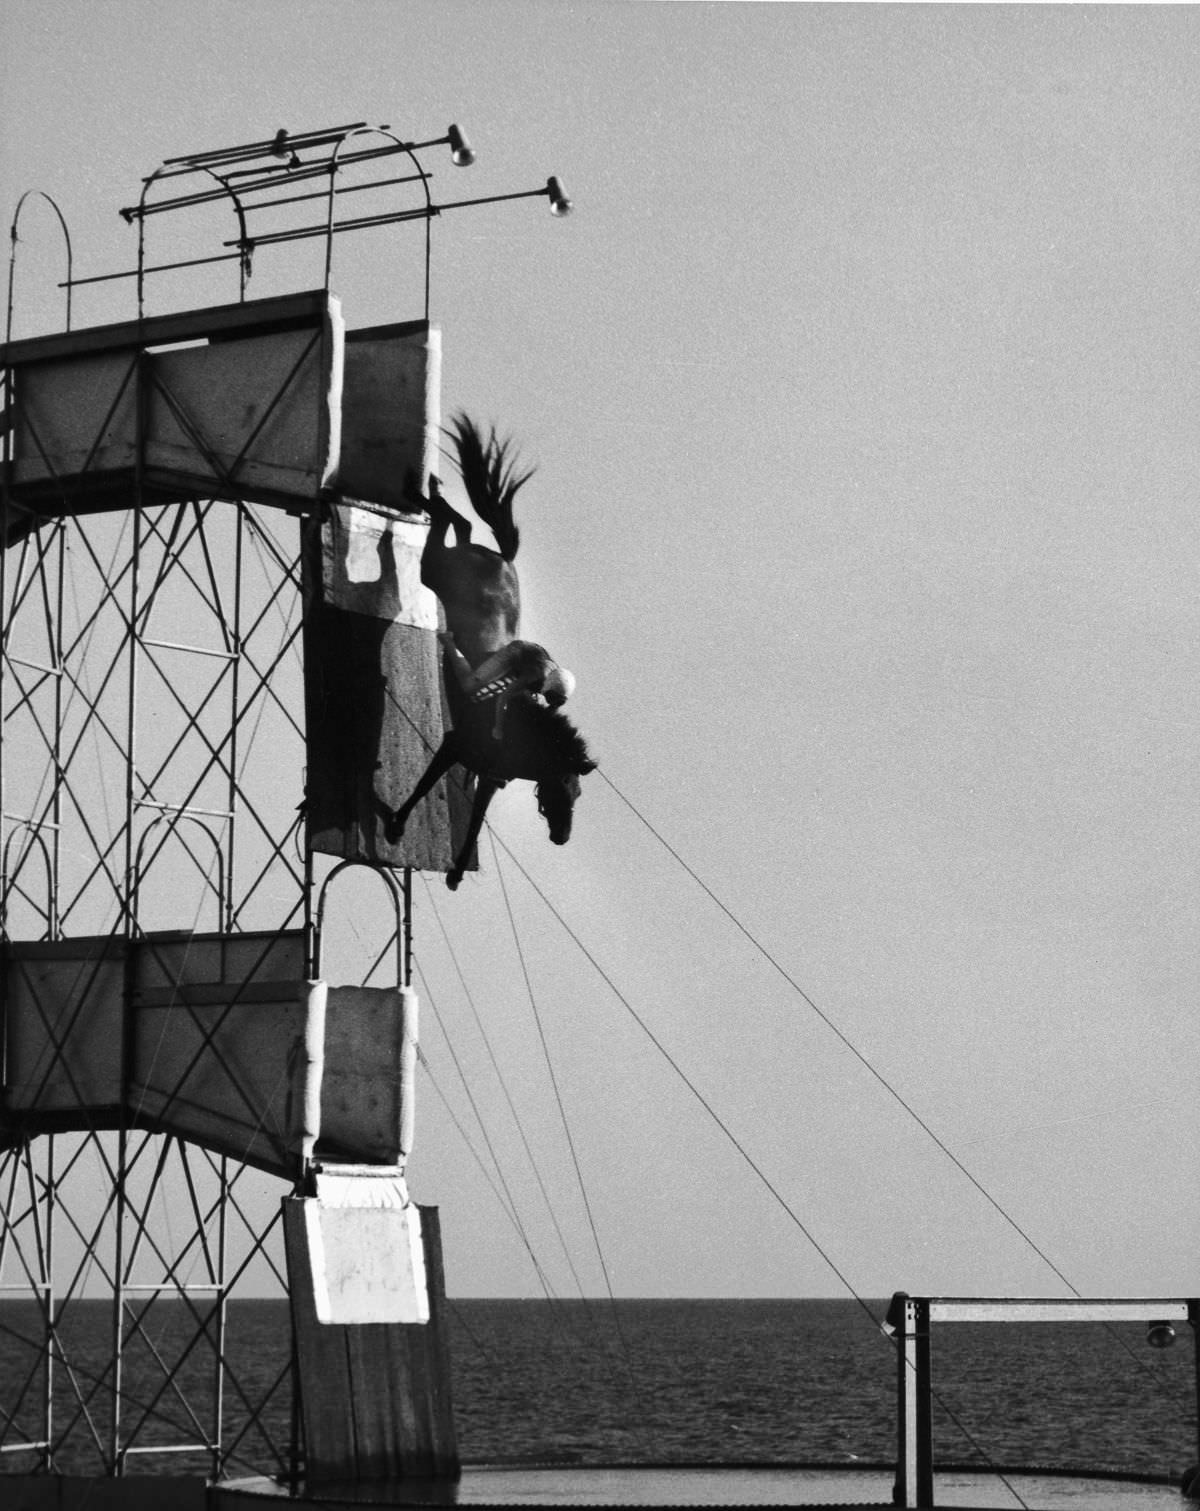 A rider clings to their horse as the animal makes a near vertical drop into the diving pool. Circa 1940s.